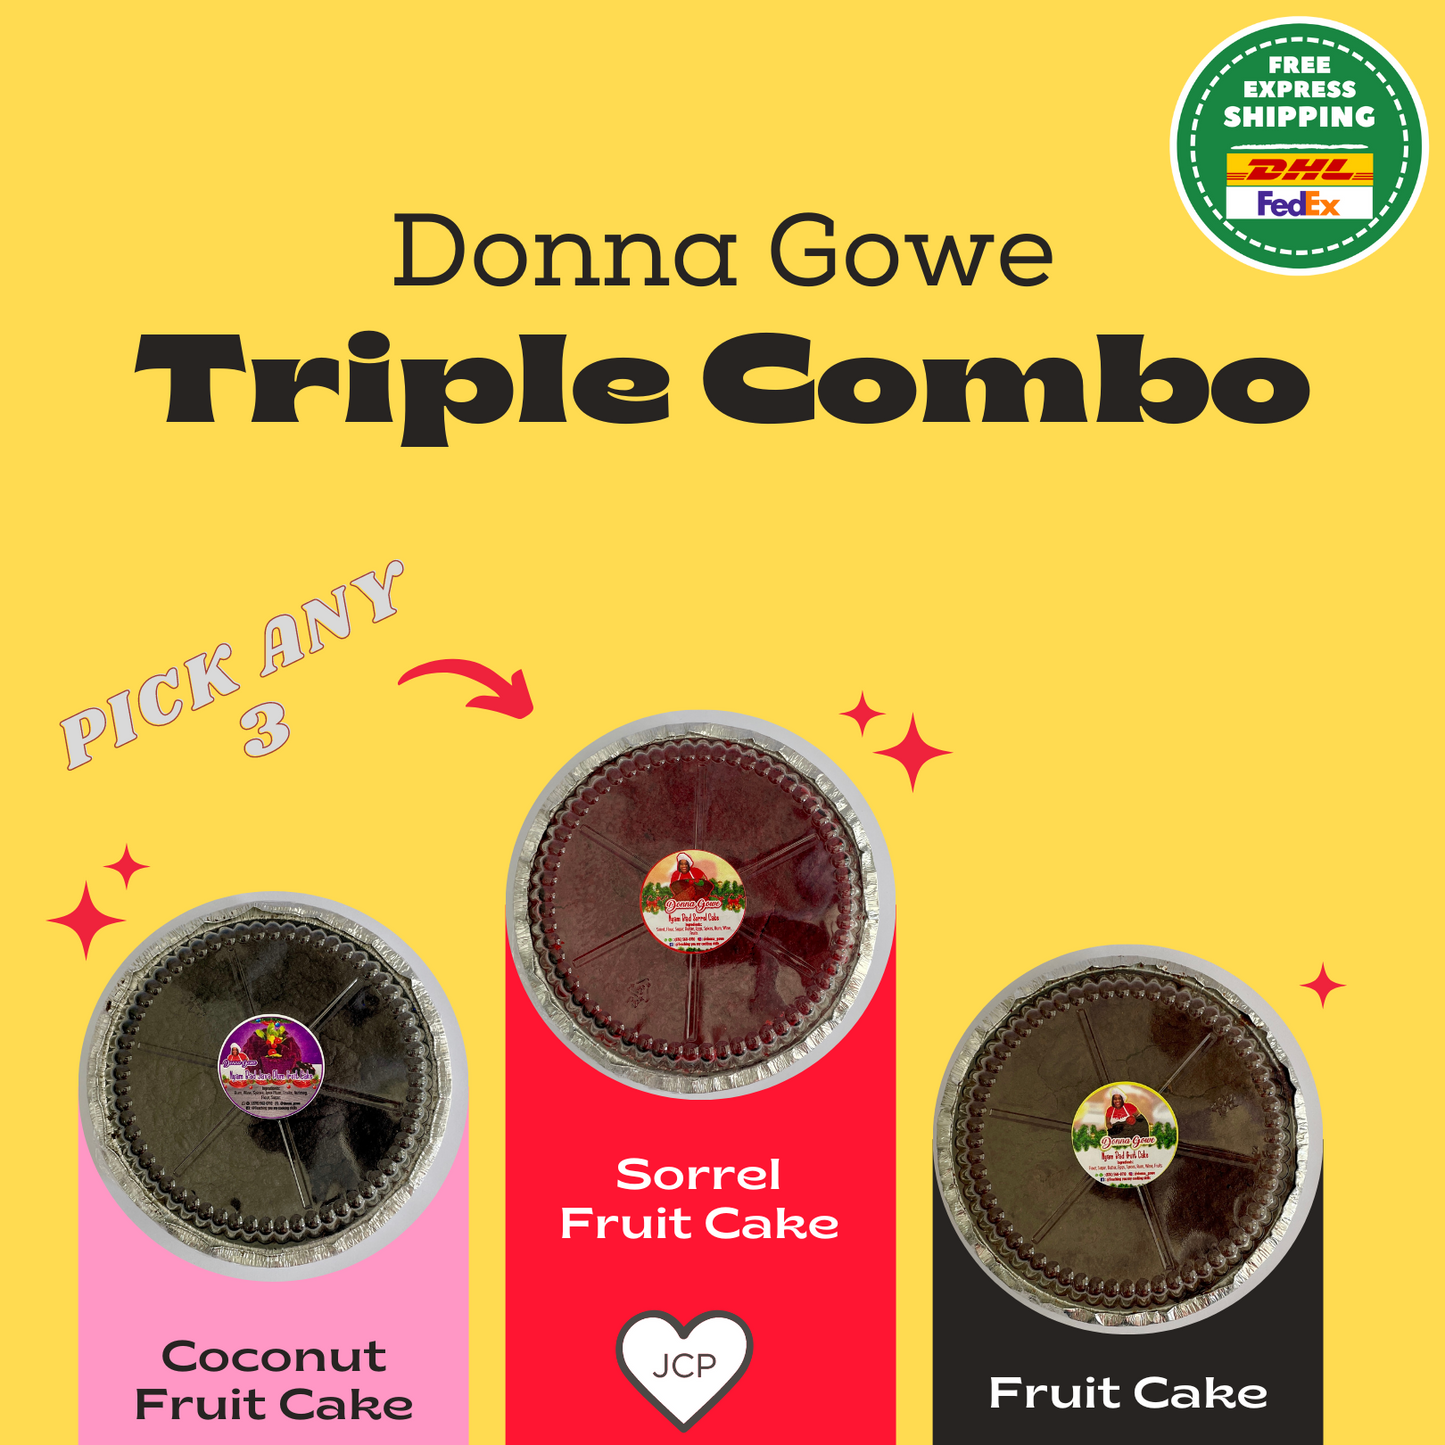 Donna Gowe Combo (3 x 1 LB Nyam Bad Cakes) - FREE Express Shipping